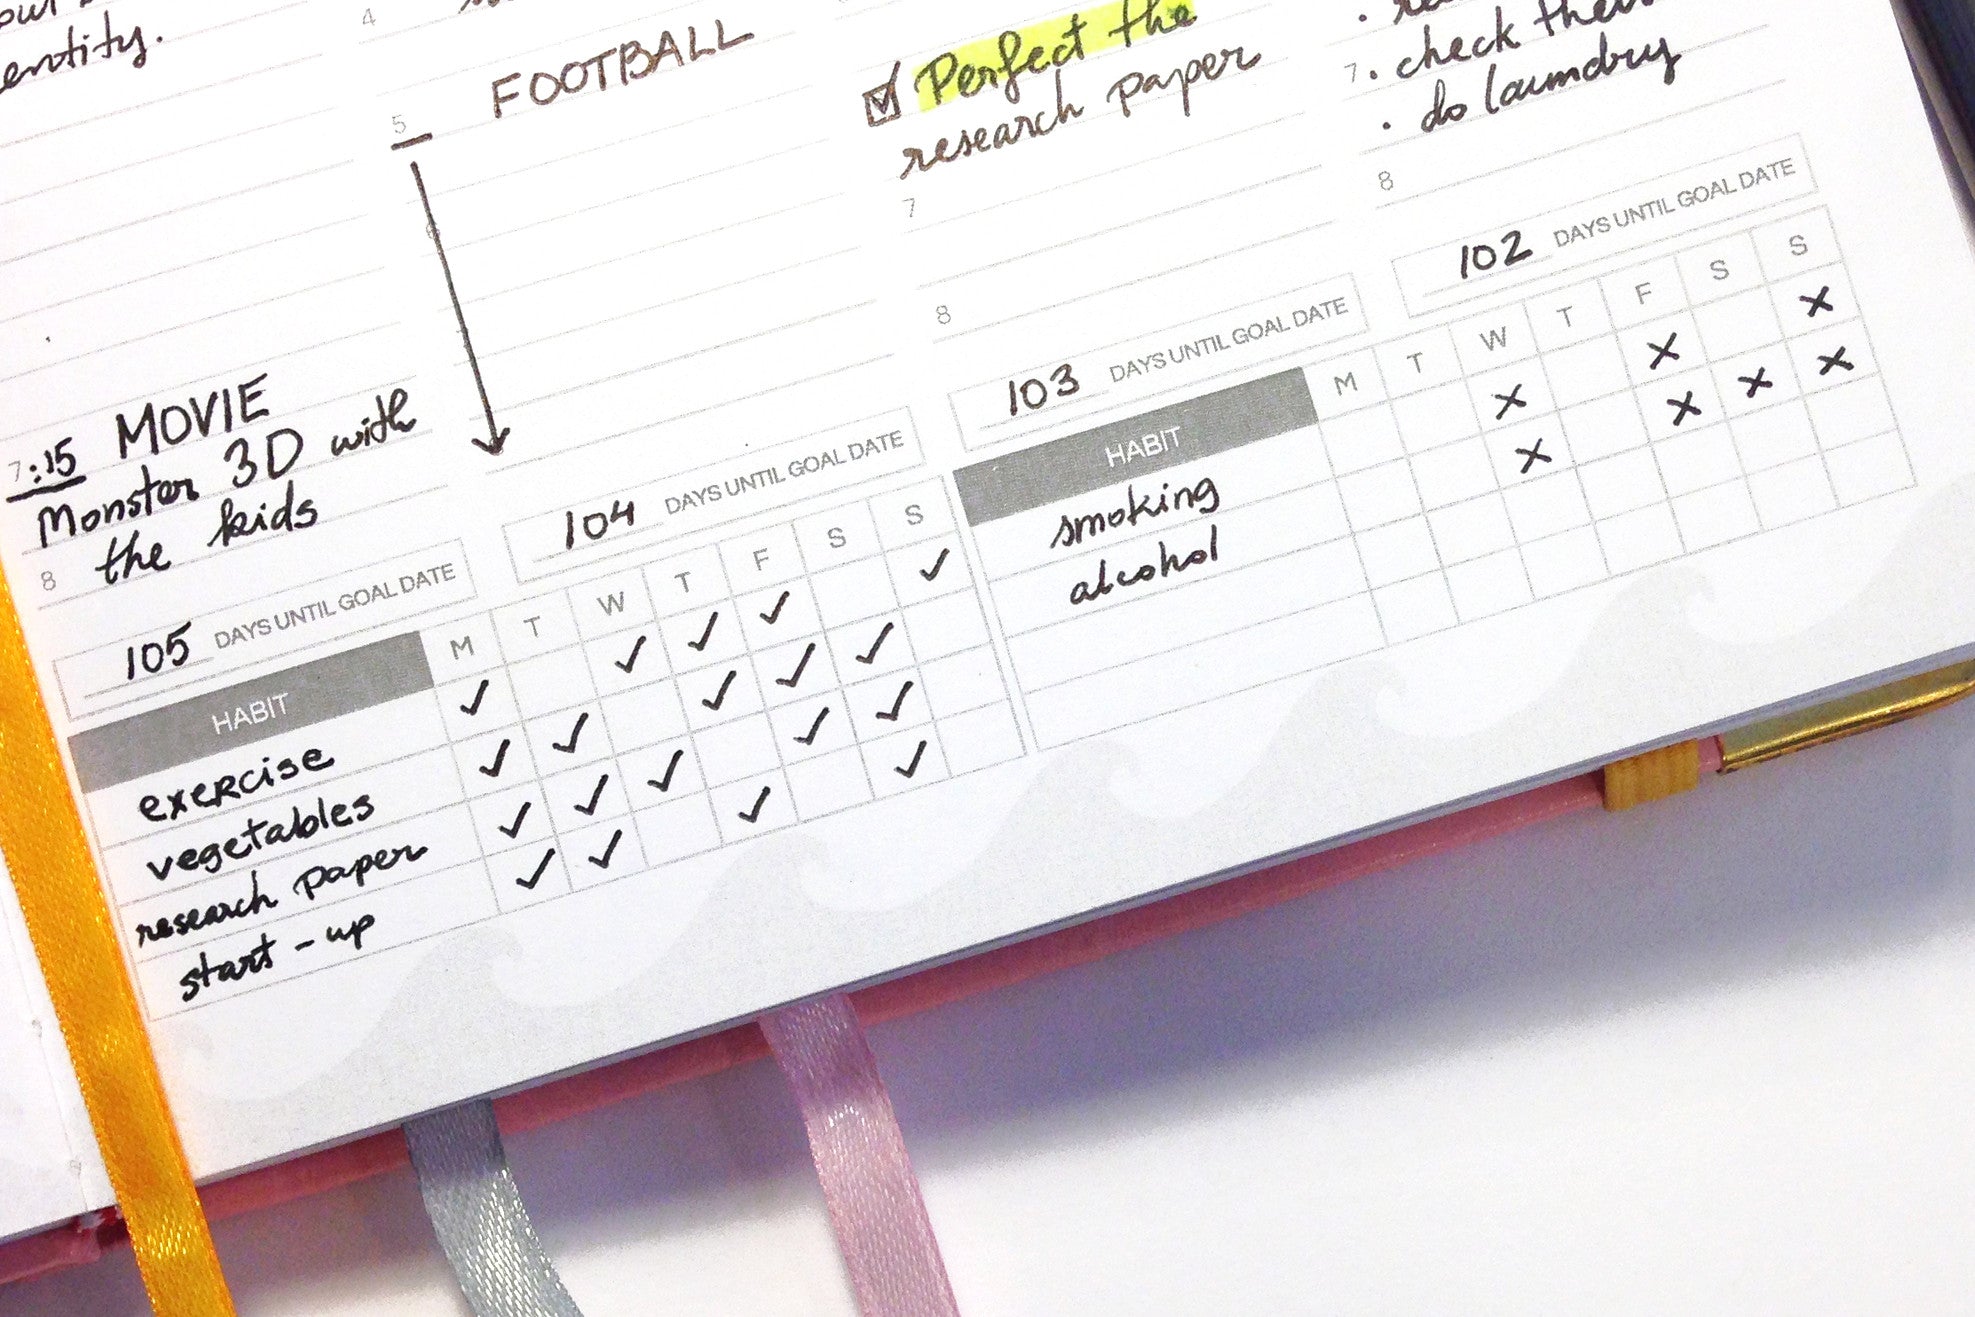 Why Goal-Date Countdowns Are So Effective